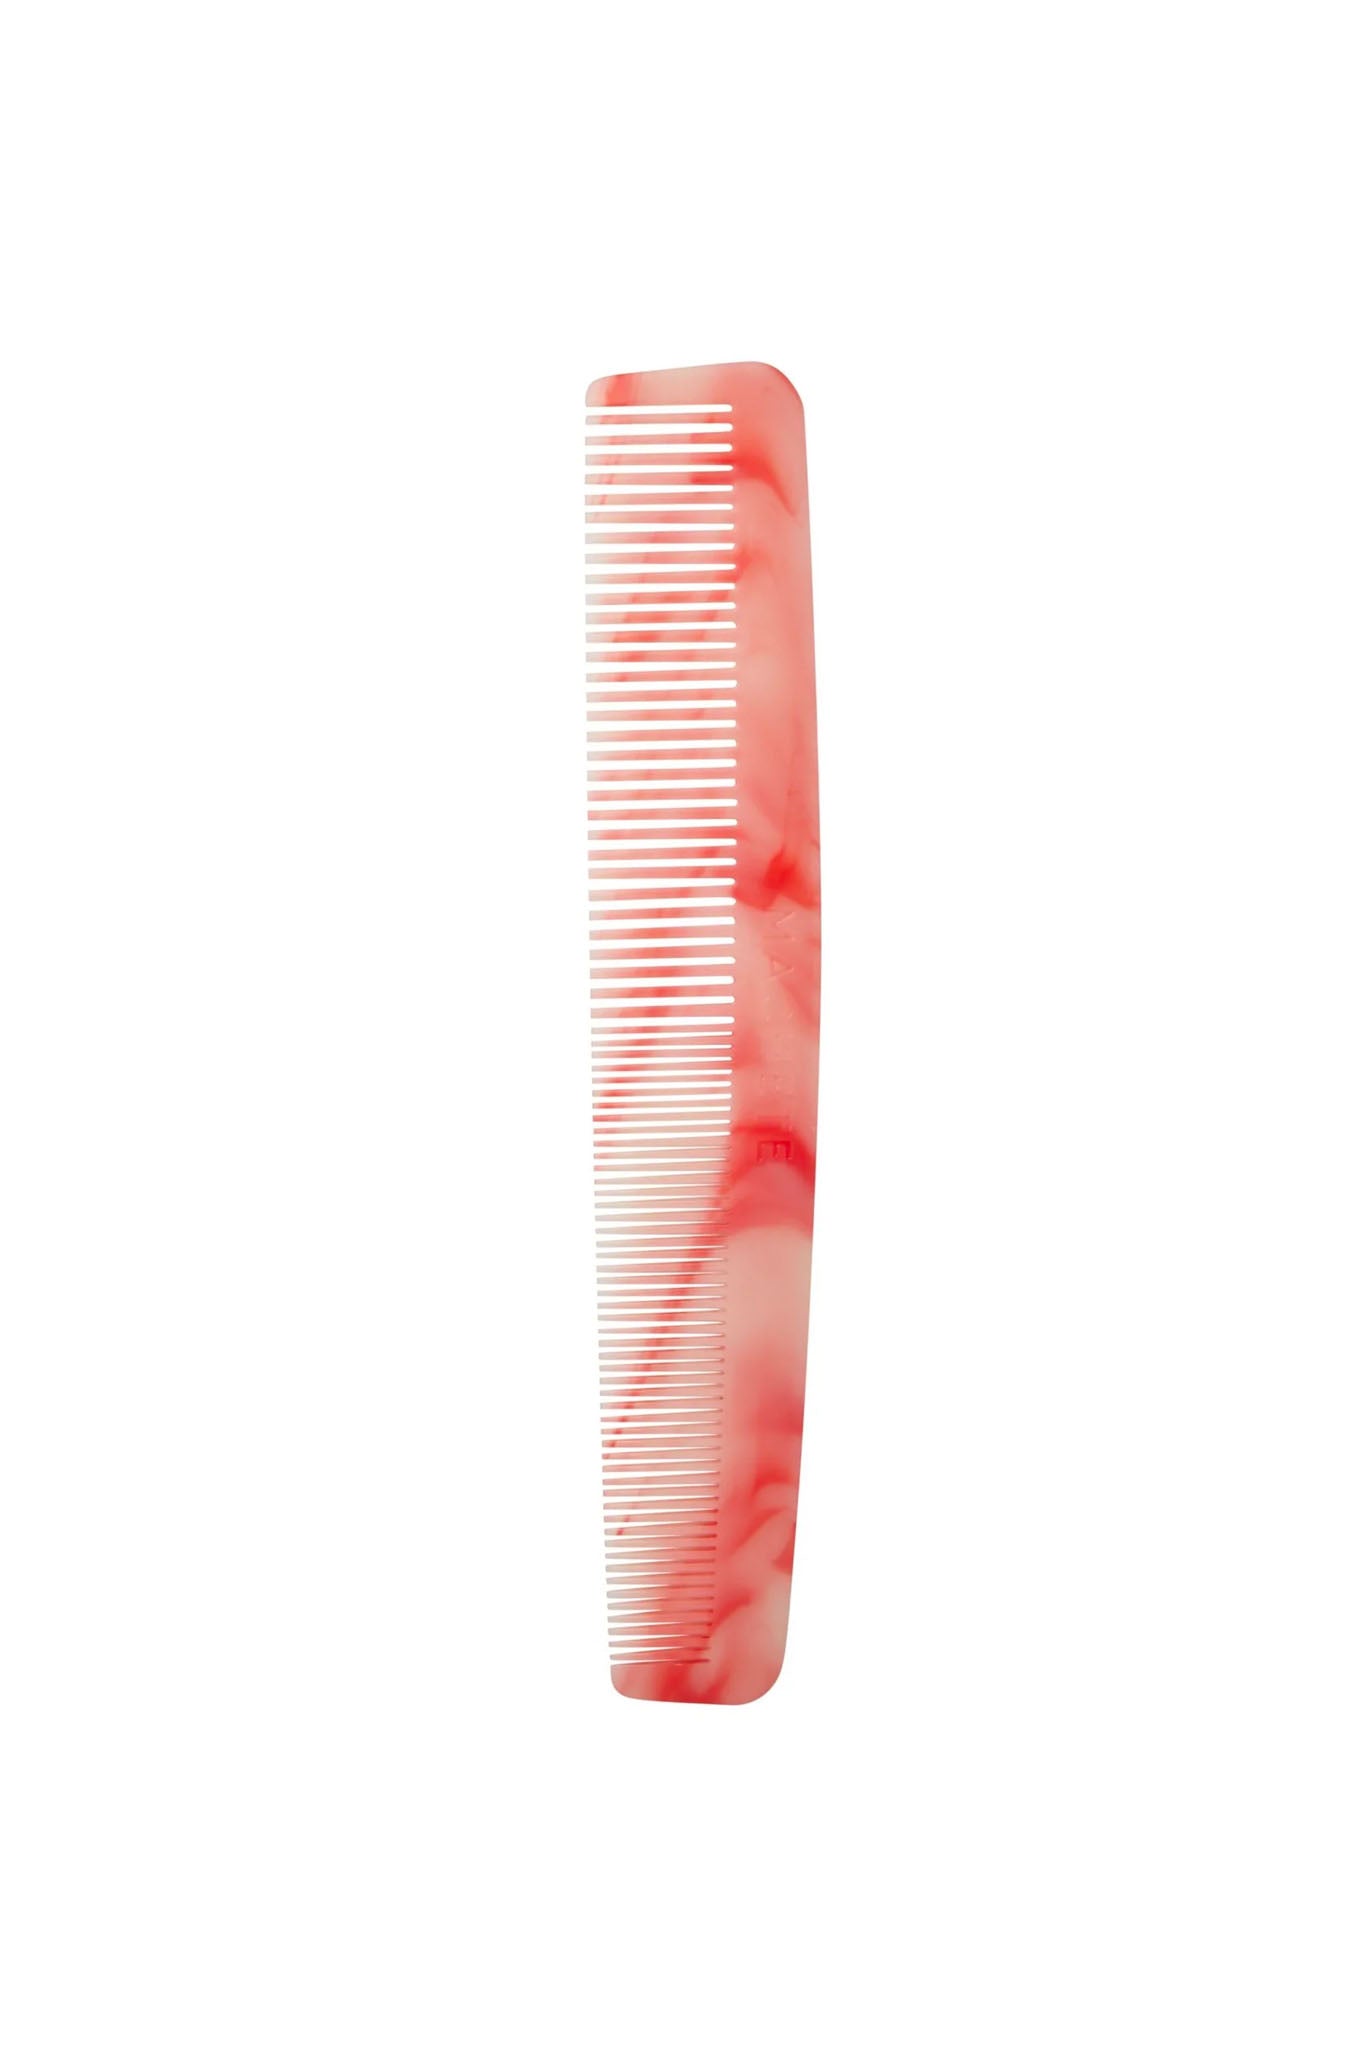 Bright Pink No. 1 Fine Tooth Comb